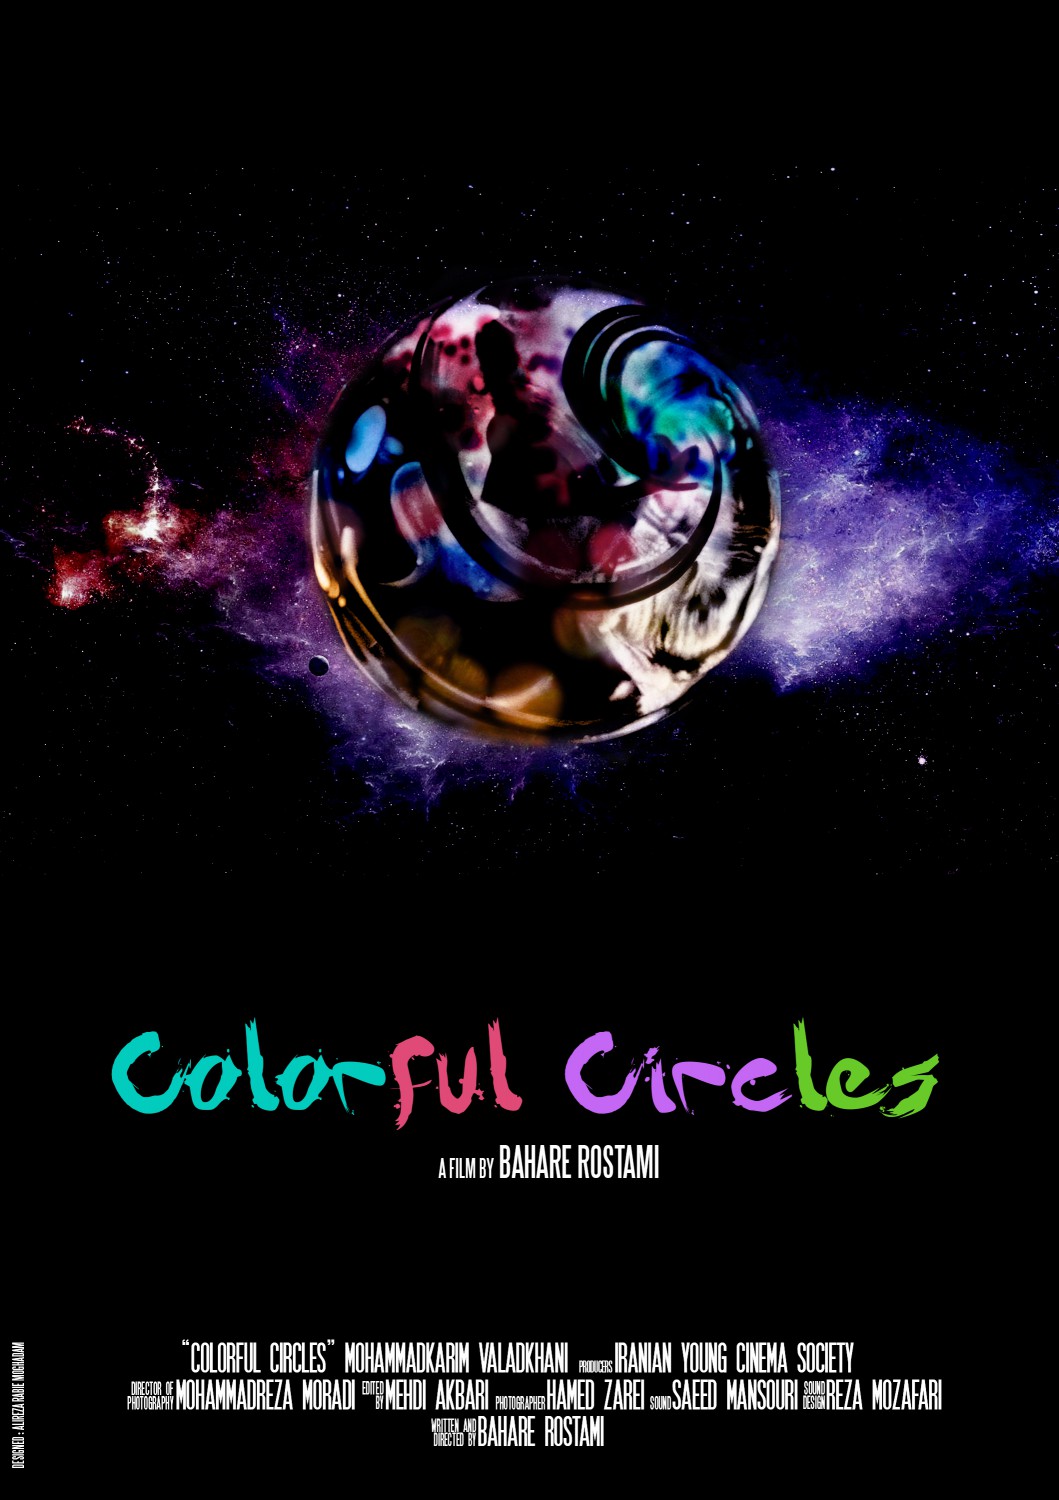 Extra Large Movie Poster Image for Colorful Circles